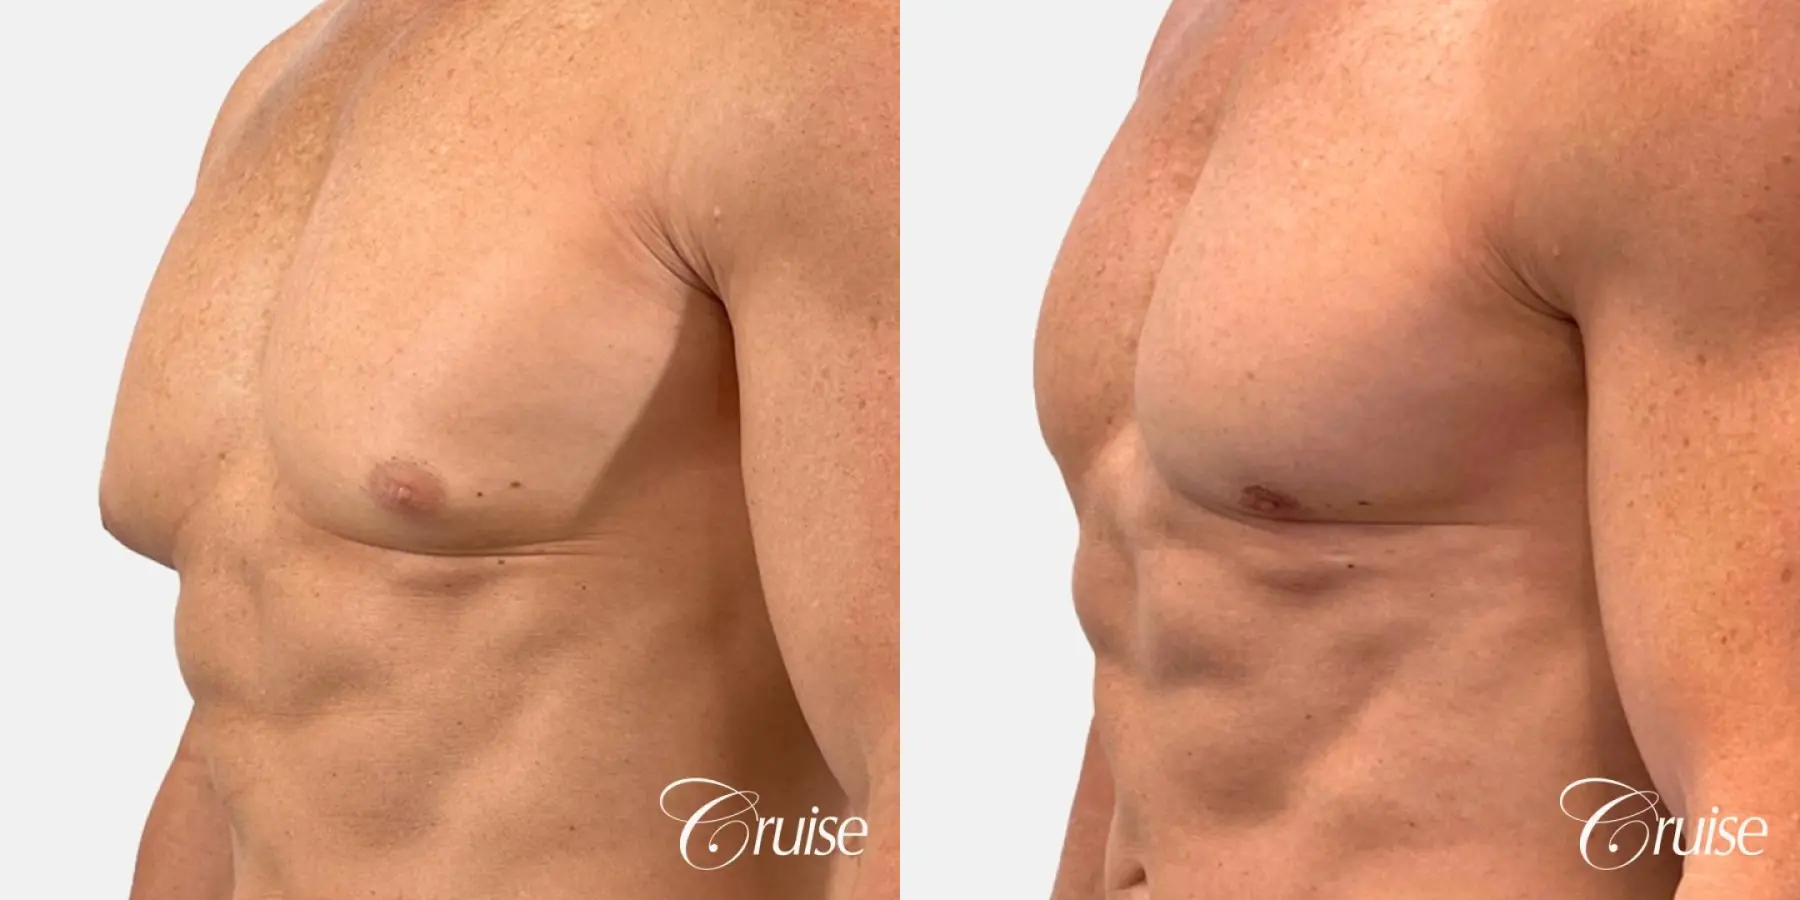 gynecomastia removal - Before and After 4